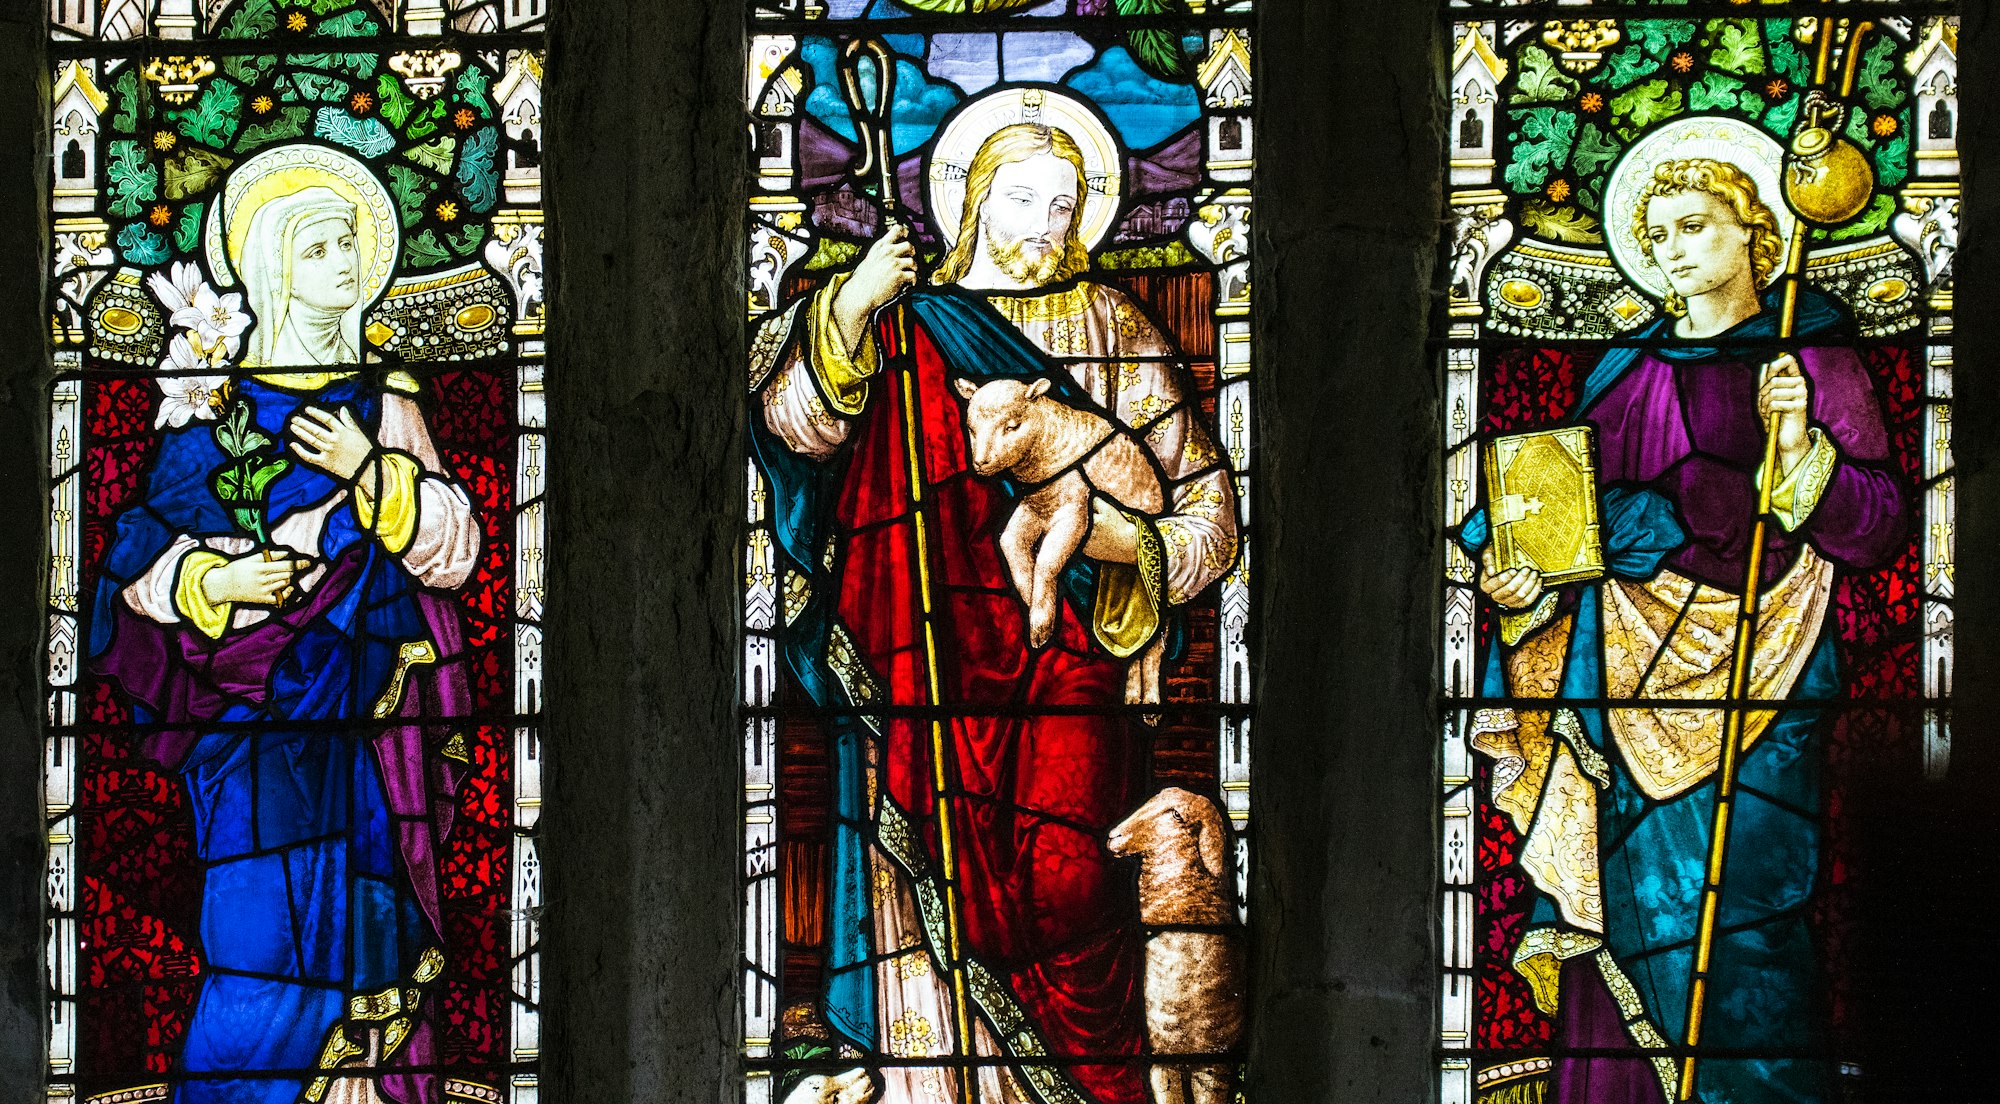 I love the tradition of stained glass windows in so many English churches. However Jesus, Mary and the apostles were all JEWS. The were 'almost certainly' NOT blue eyed and blond haired. 